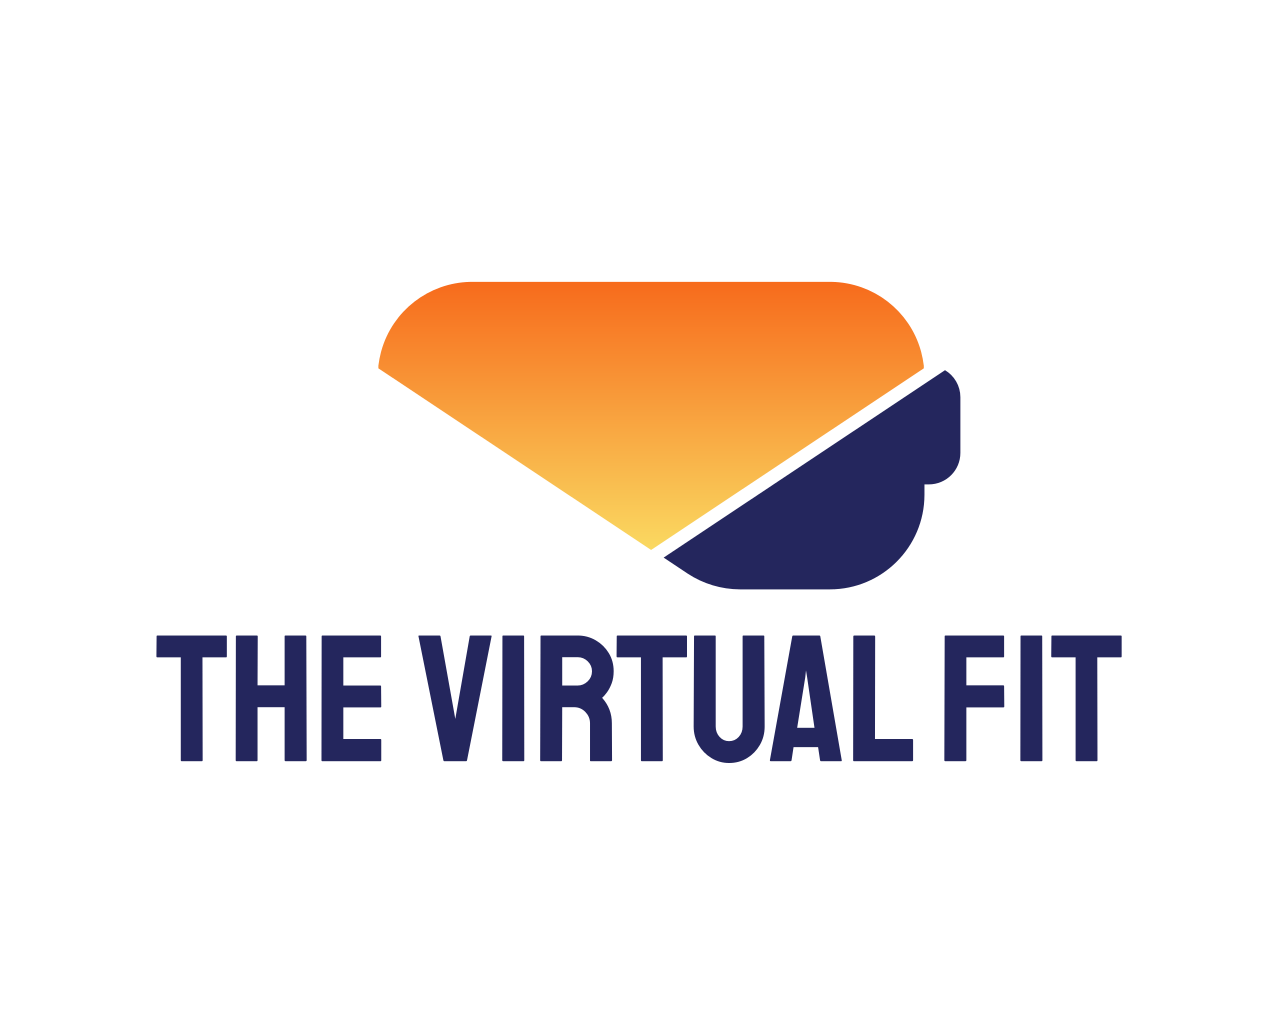 Welcome to The Virtual Fit.